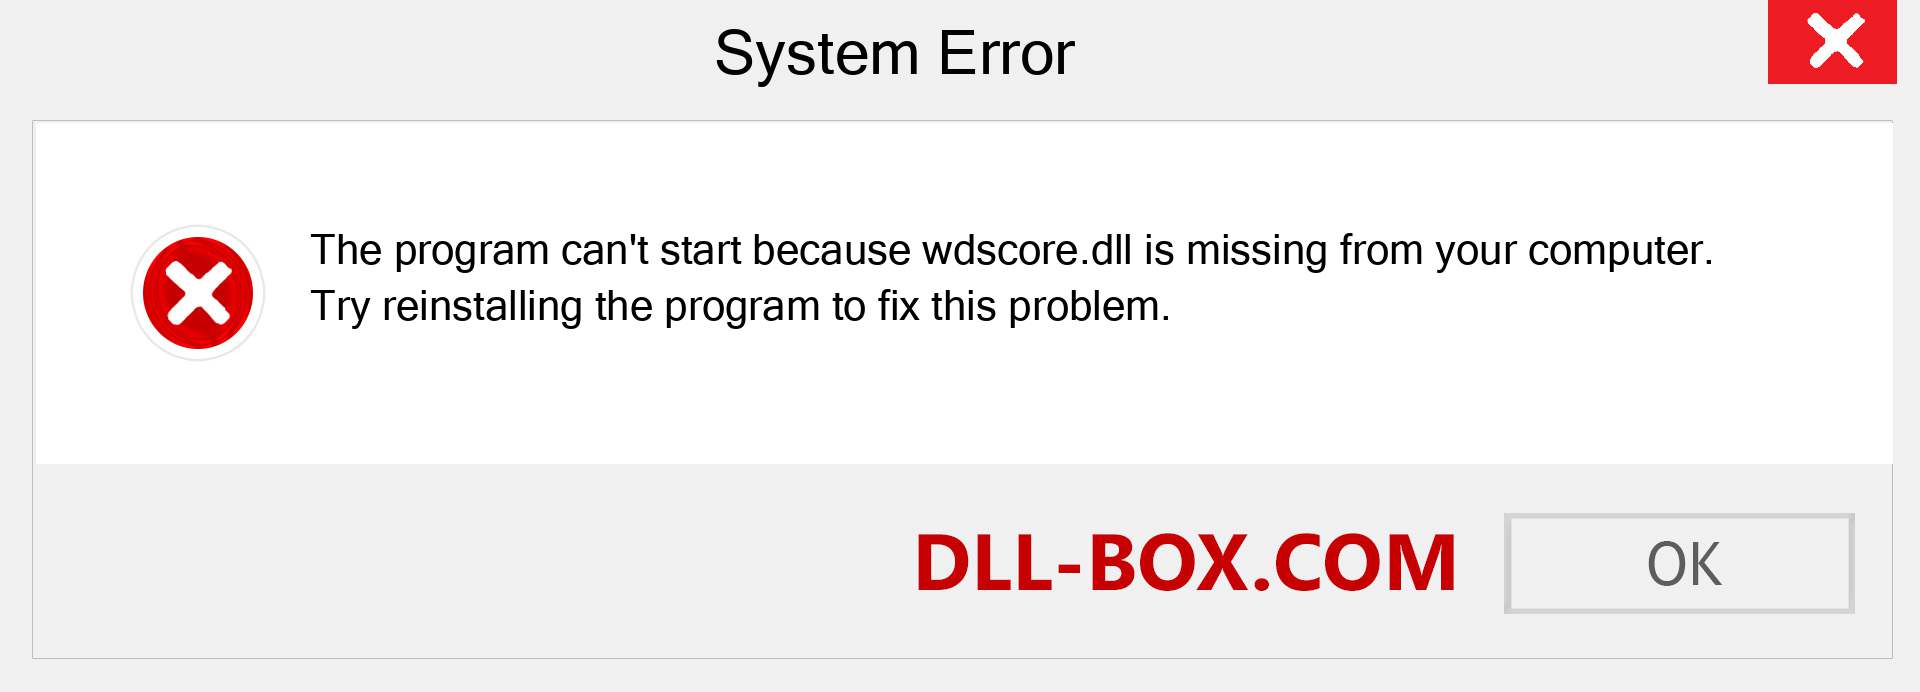  wdscore.dll file is missing?. Download for Windows 7, 8, 10 - Fix  wdscore dll Missing Error on Windows, photos, images